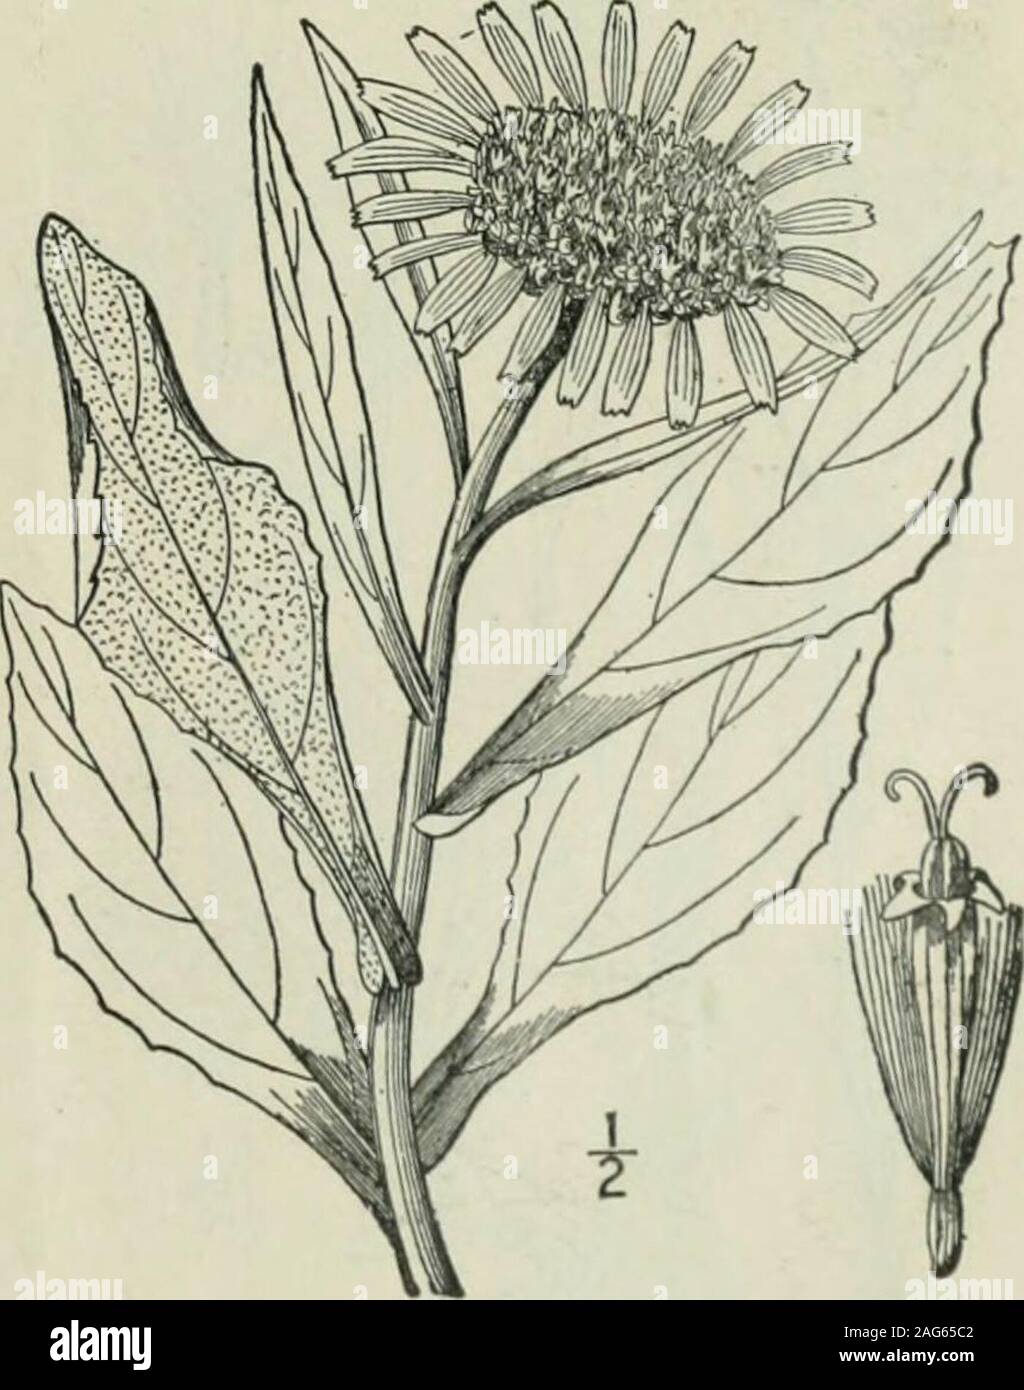 . An illustrated flora of the northern United States, Canada and the British possessions : from Newfoundland to the parallel of the southern boundary of Virginia and from the Atlantic Ocean westward to the 102nd meridian. une-Sept. 8. Senecio Pseudo-Arnica Less. Sea-beachSenecio. Fig. 4617. Arnica maritima L. Sp. PI. 884. ly^Z- Not 5*. mari- timus L.Senecio Pseudo-Arnica Less. Linnaea 6: 240. 1831. Perennial, somewhat fleshy; stem stout, mostlysimple, very leafy, 6-3° high. Leaves oblong-obo-vate. lanceolate, or the lower spatulate, acute orobtuse at the apex, 4-8 long, ^-2 wide, denselytoment Stock Photo